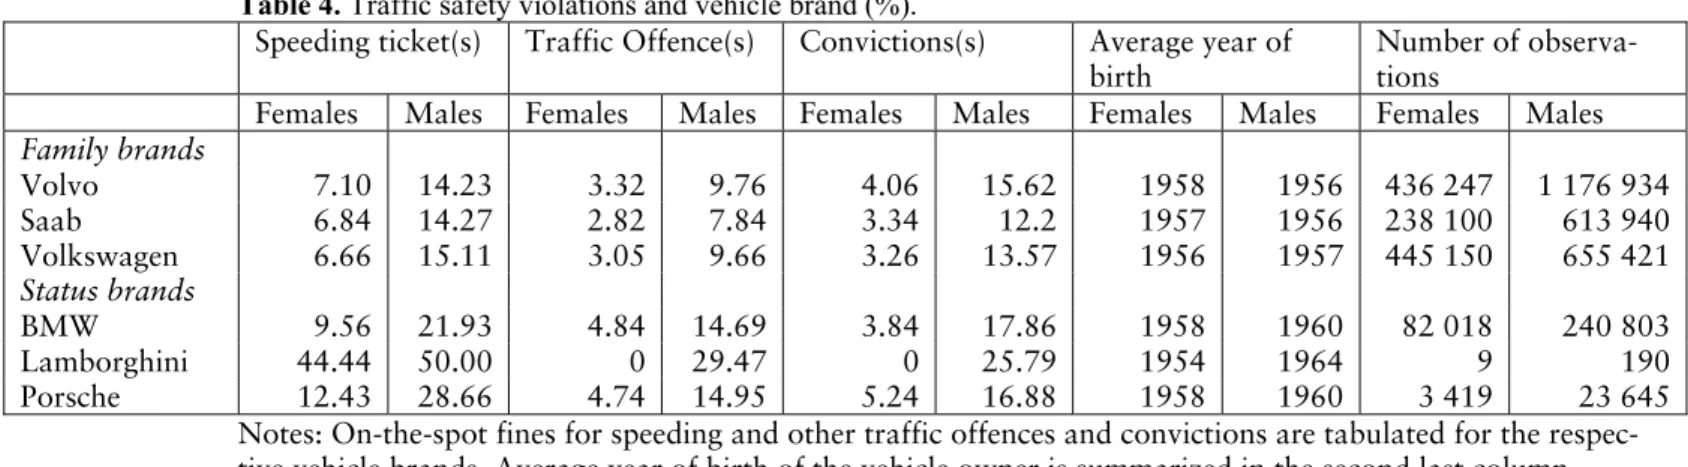 Table 4. Traffic safety violations and vehicle brand (%). 